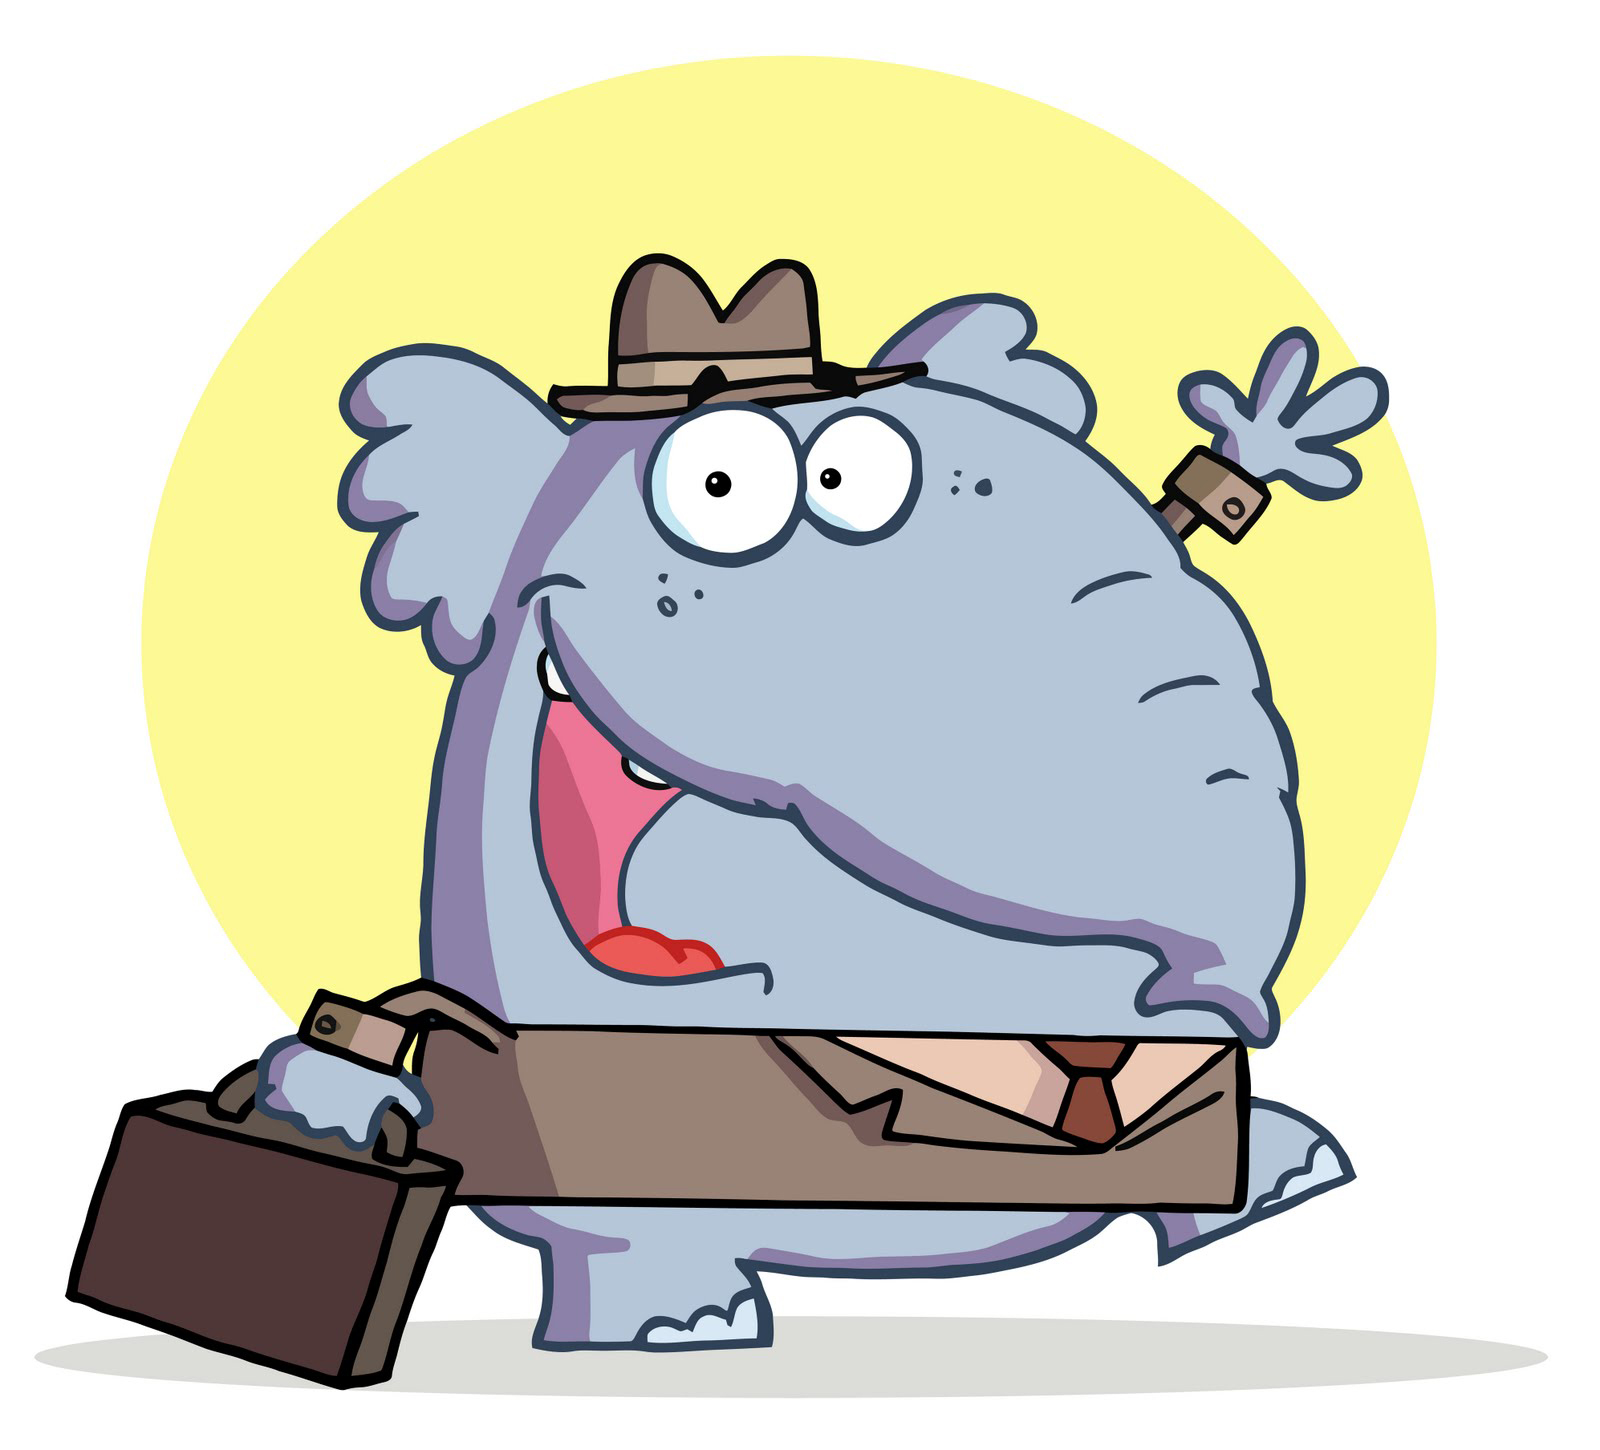 Cartoon Business Elephant Character Carrying Briefcase High Resolution Version (JPEG Image, 1600x1450 pixels) · Free Cartoon Styled Clipart ..